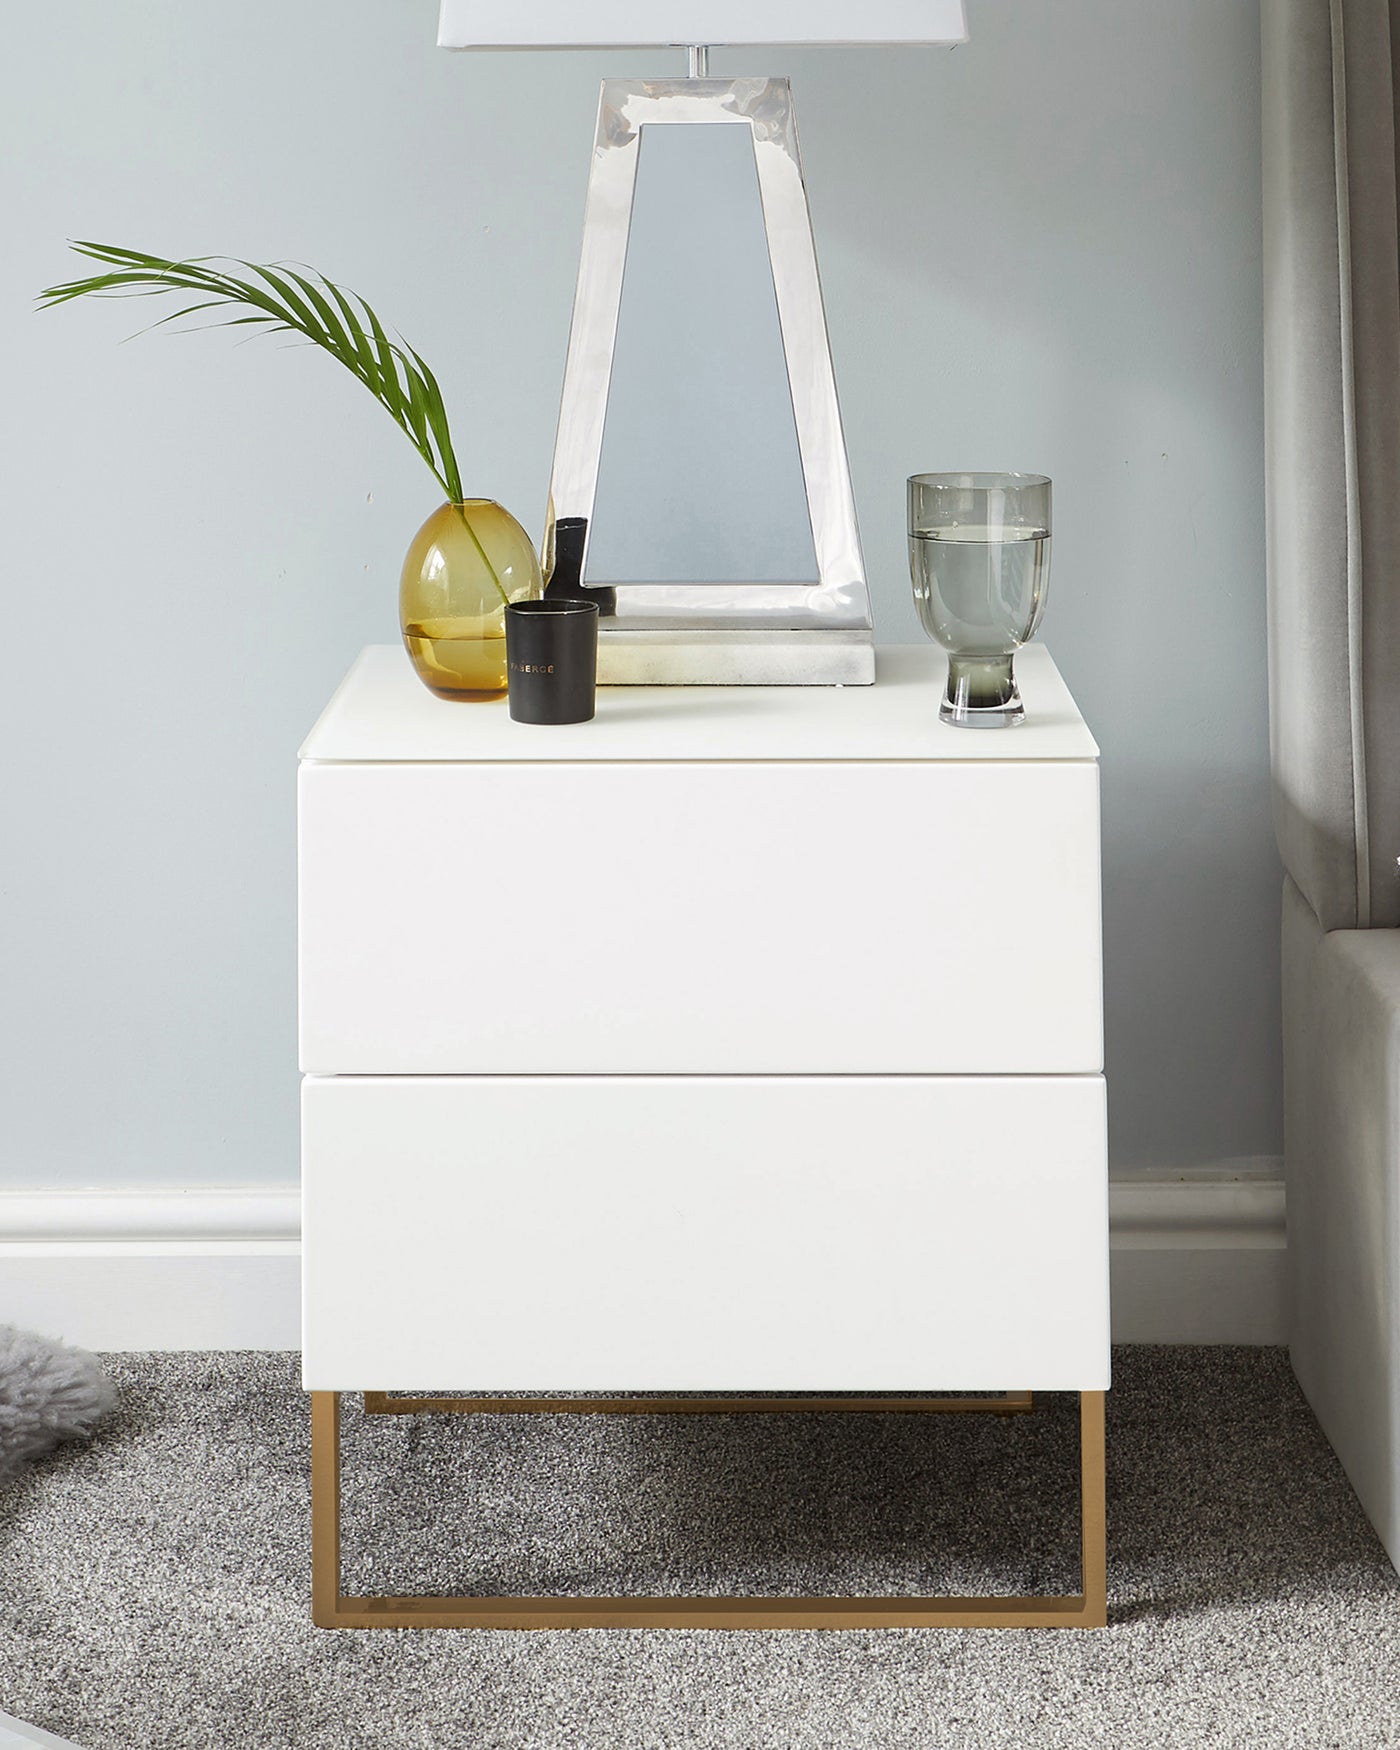 Modern white two-drawer nightstand with brass-finished metal base, styled with a decorative lamp, glass candle holder, and a vase with green foliage on top. The nightstand is set against a grey wall and complemented by a light grey carpet.